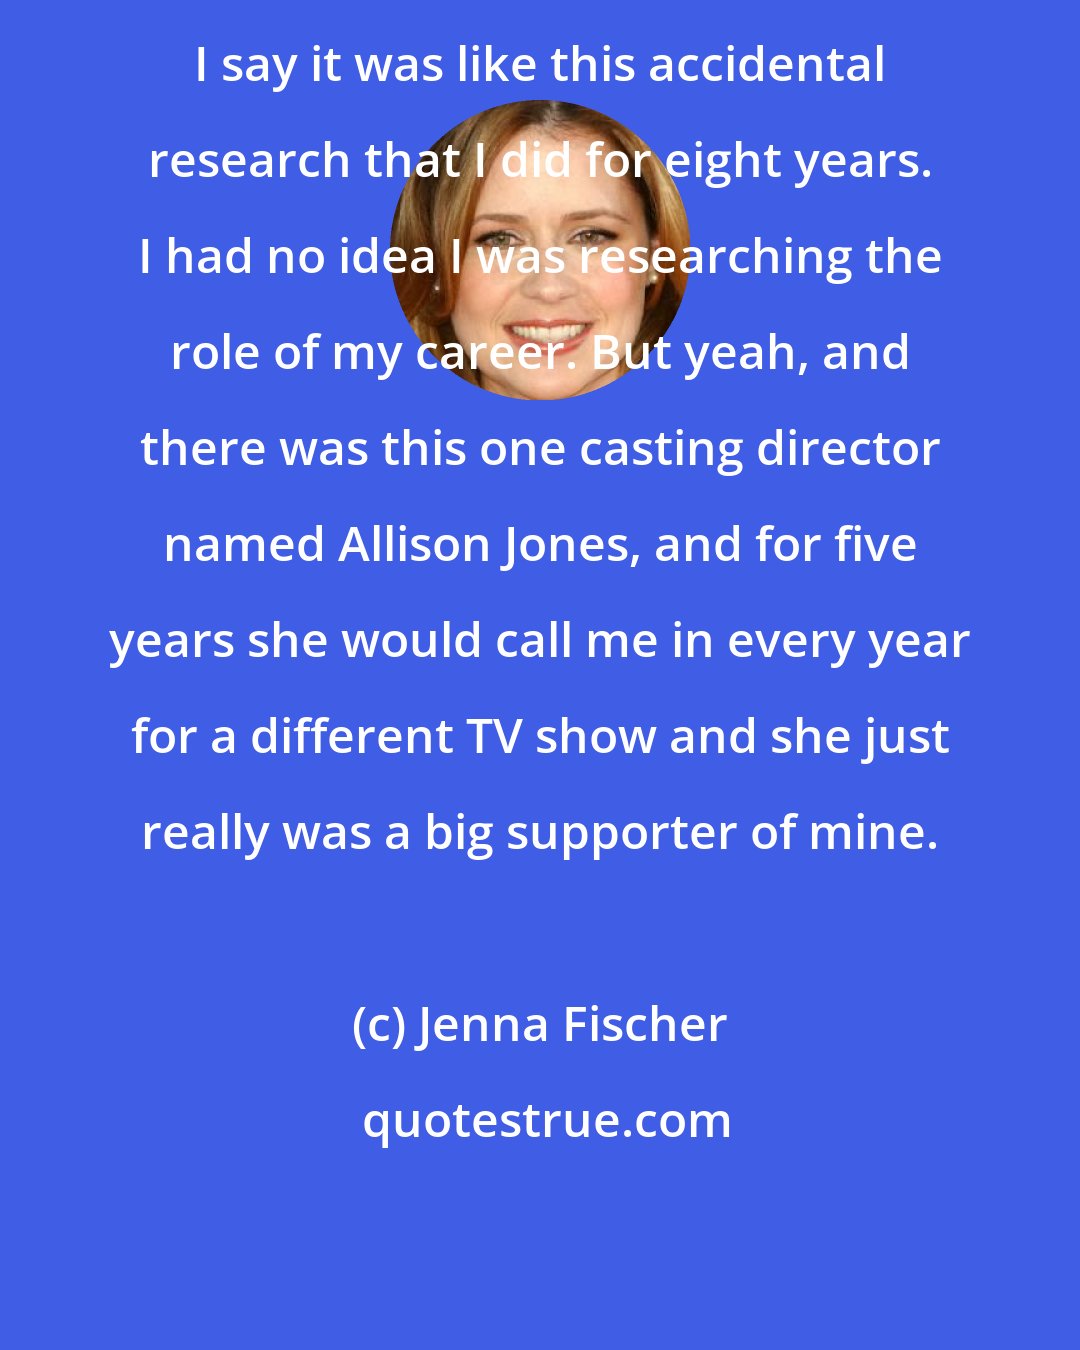 Jenna Fischer: I say it was like this accidental research that I did for eight years. I had no idea I was researching the role of my career. But yeah, and there was this one casting director named Allison Jones, and for five years she would call me in every year for a different TV show and she just really was a big supporter of mine.